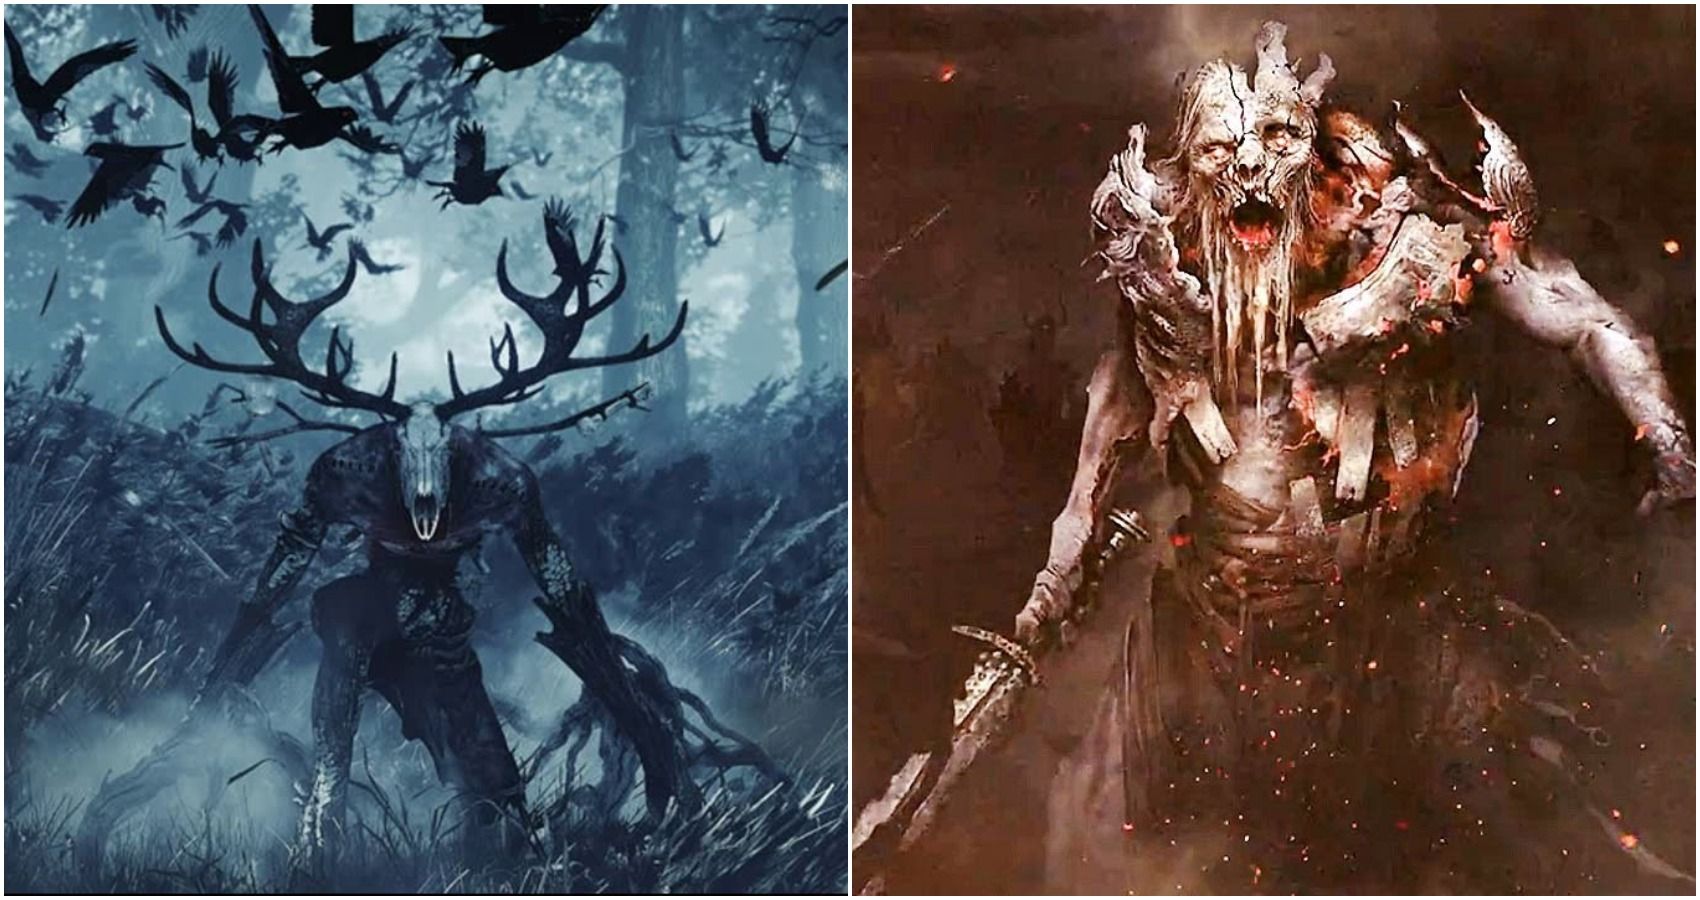 Combined image from The Witcher and God of War